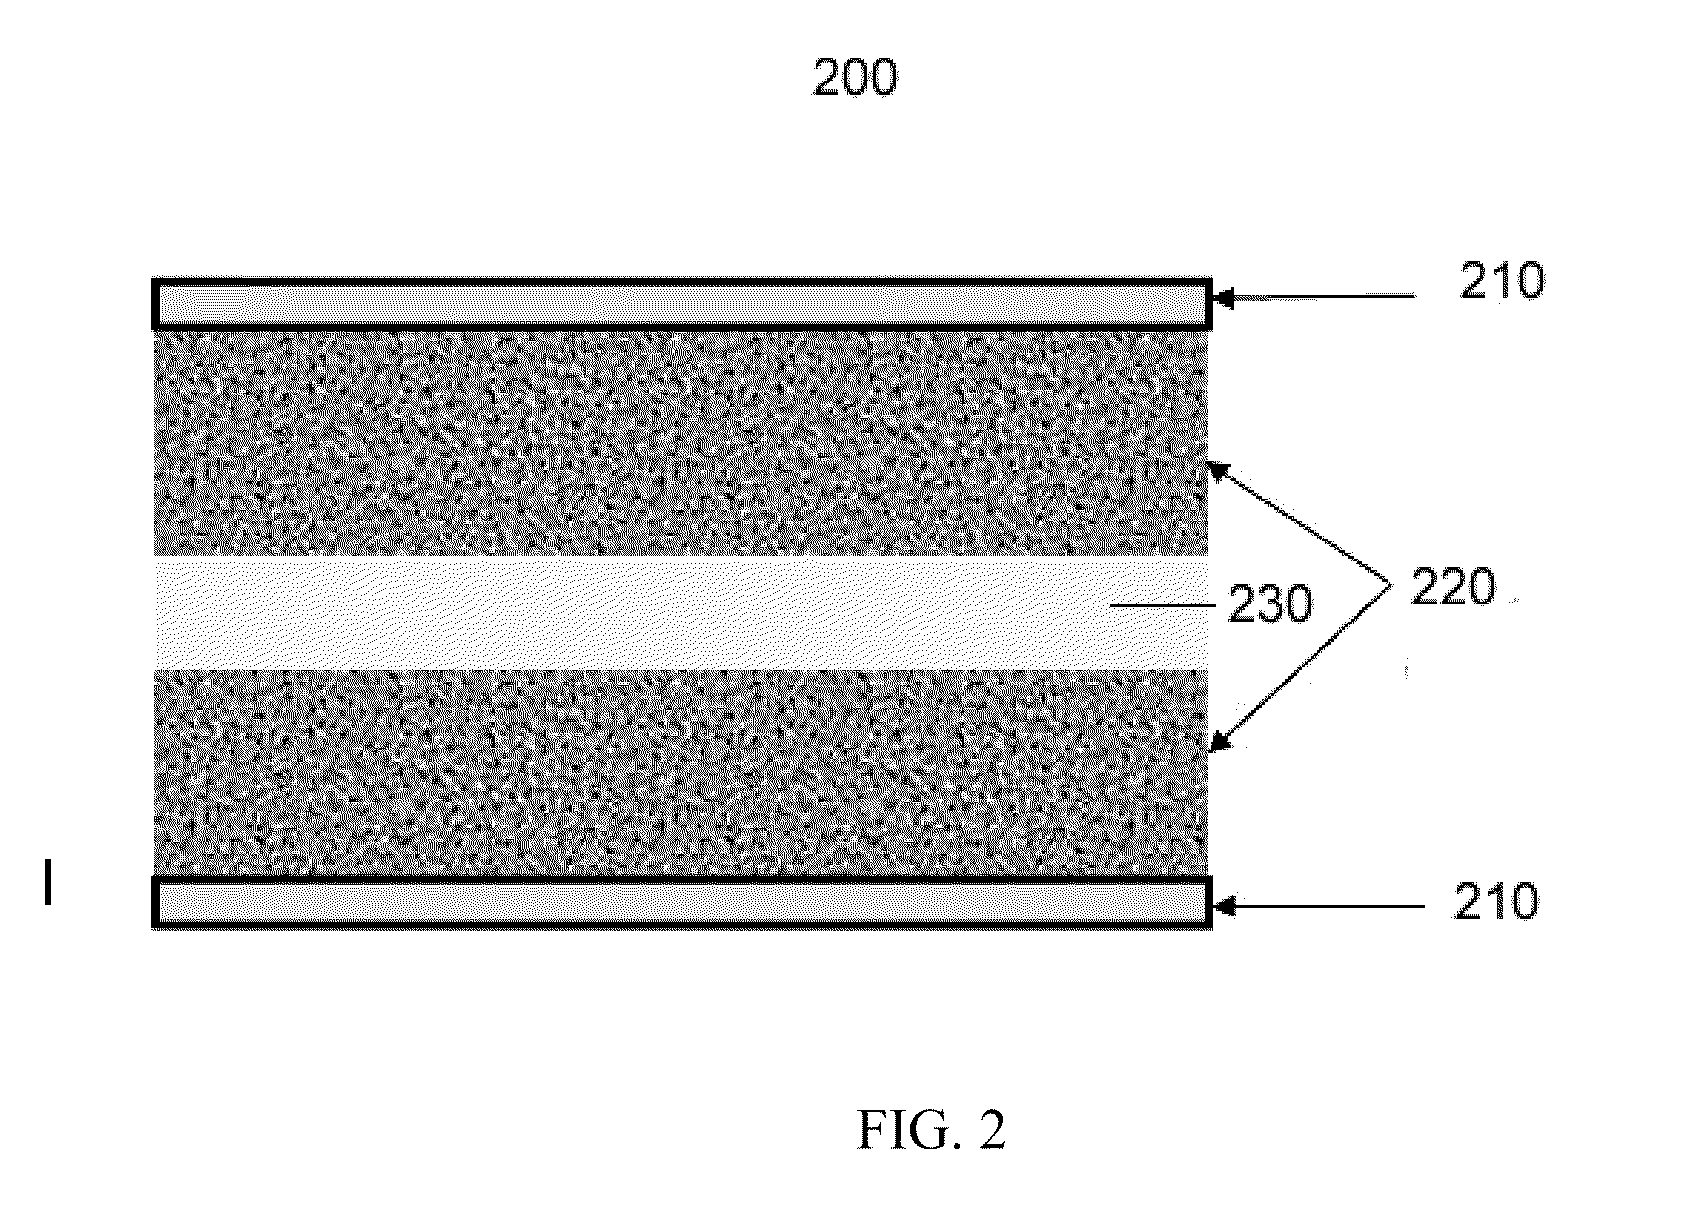 Ultracapacitors and methods of making and using